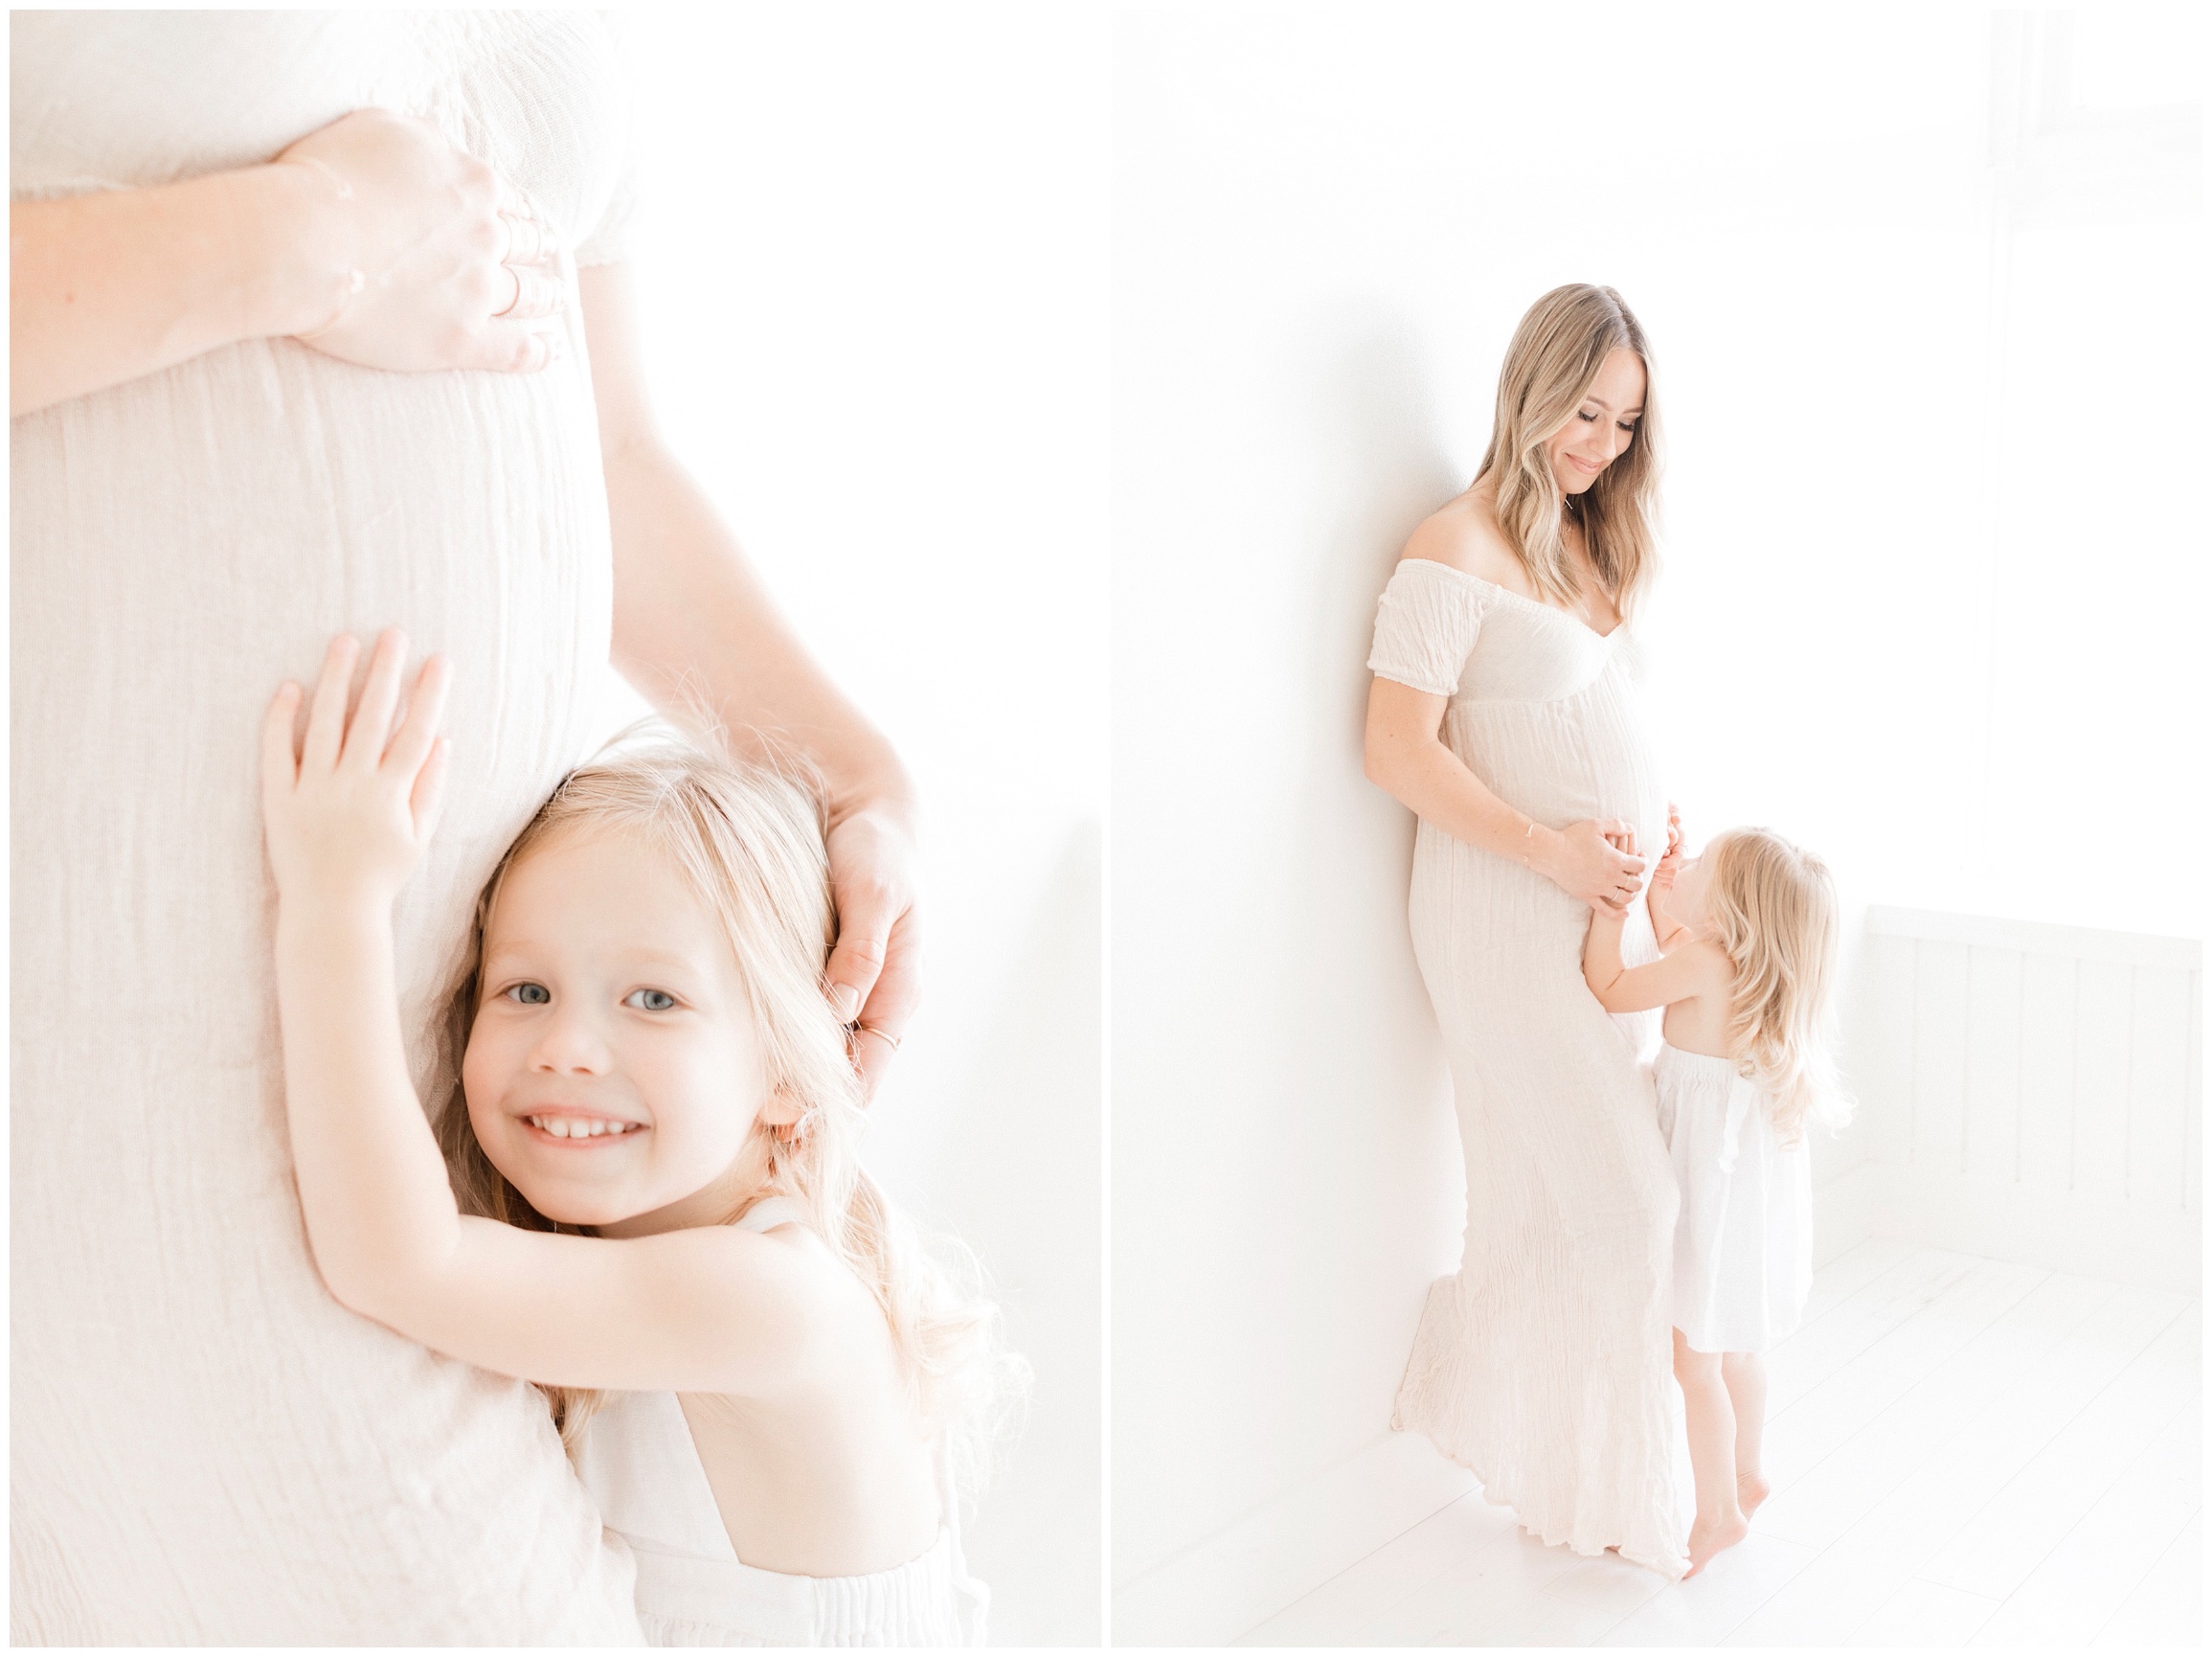 maternity & family photography in studio - Newborn Photography Los Angeles:  Baby & maternity photography Los Angeles-based in Long Beach